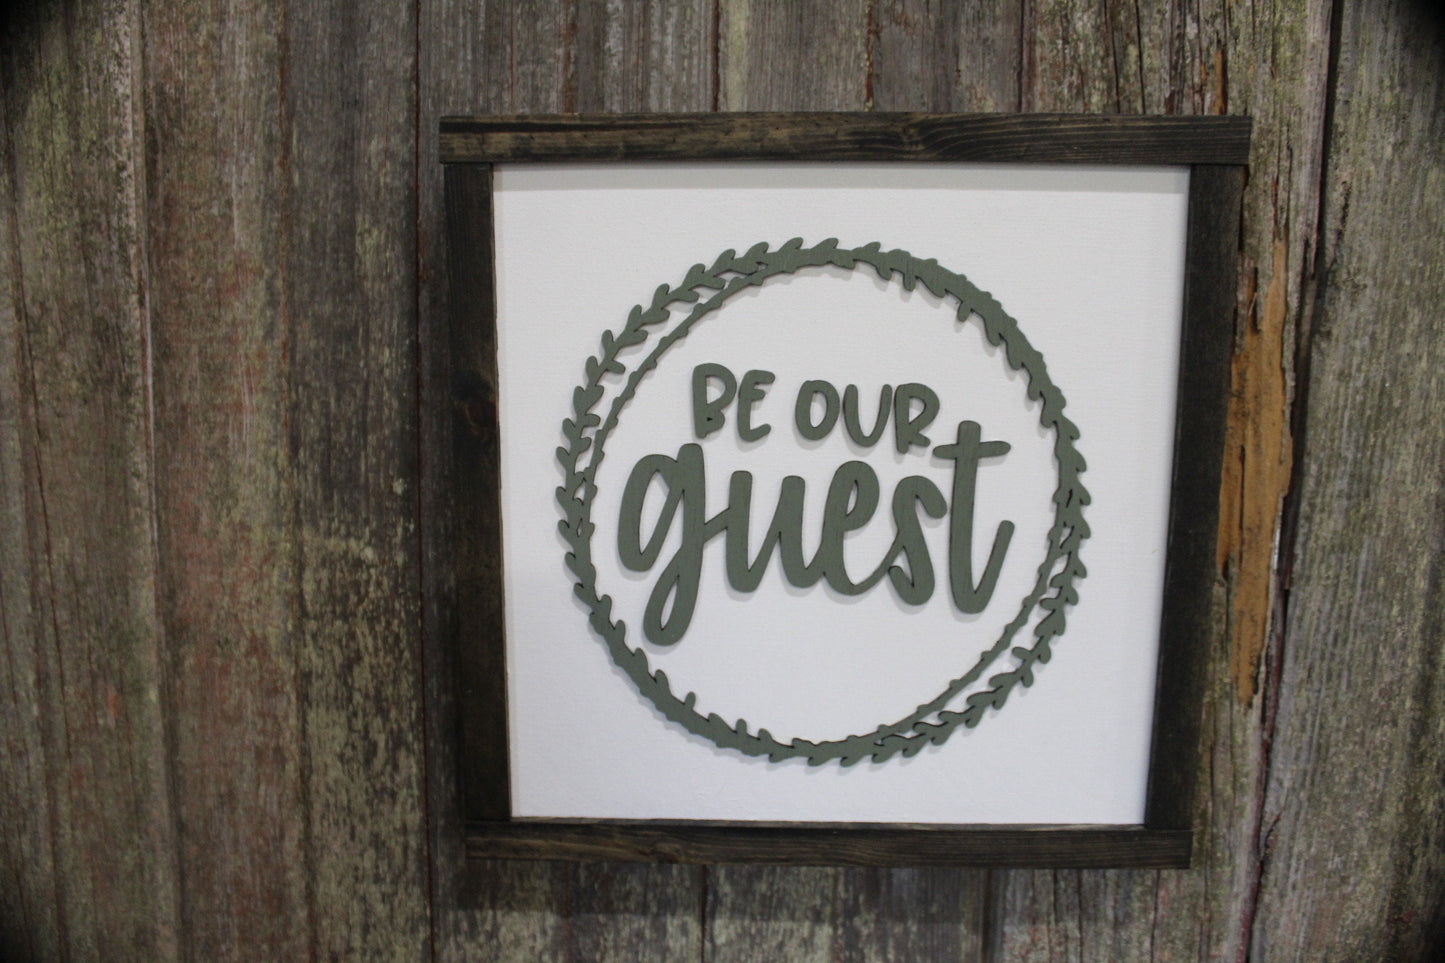 Be Our Guest Wood Sign 3D Raised Text Script Laurel Wreath Country Primitive Framed Wall Hanging Decoration Porch Decor Black White Green